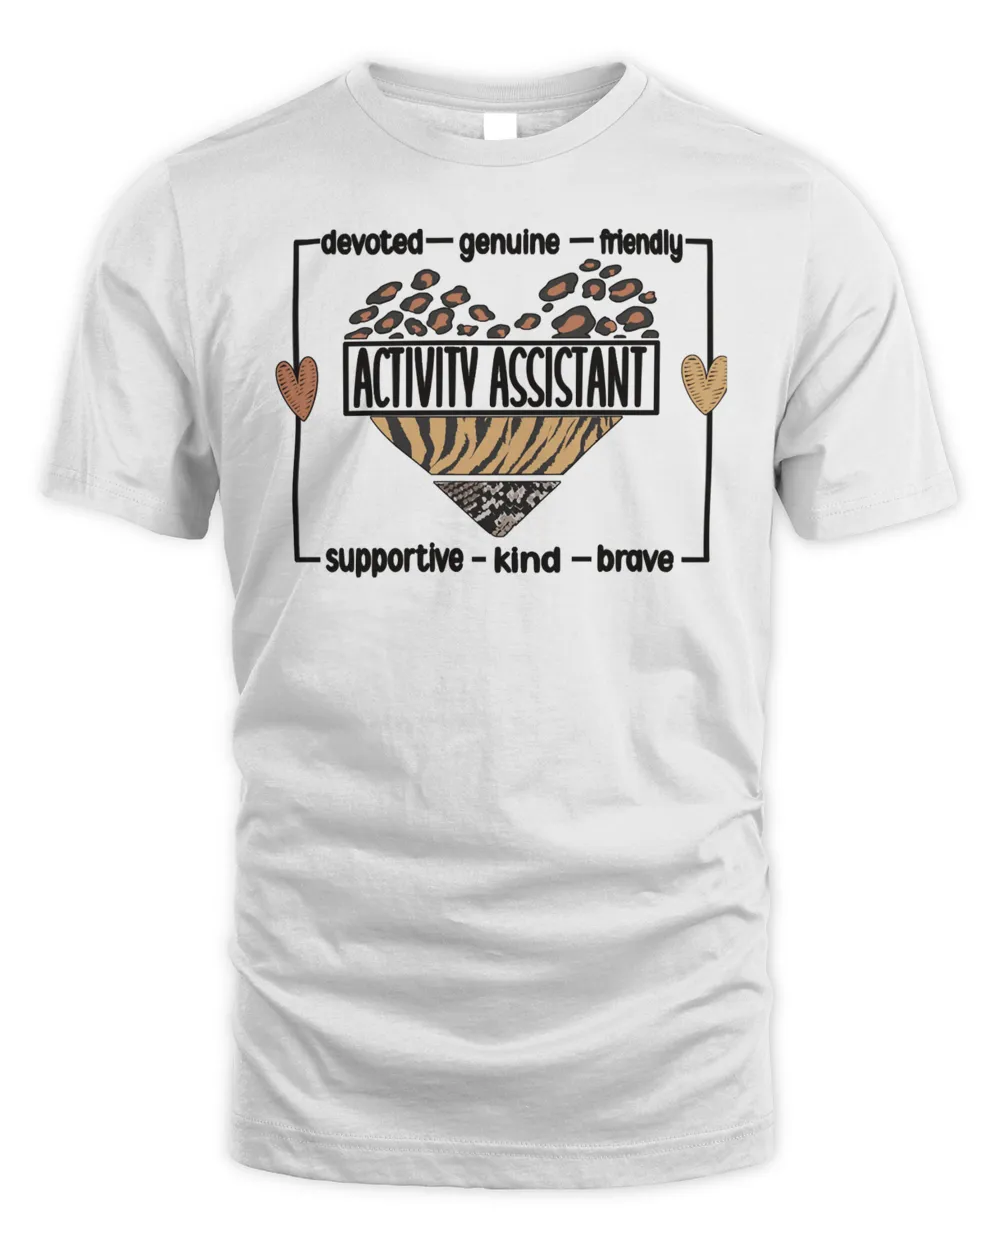 Activity Assistant Activity Professional Week Gift Classic T-Shirt